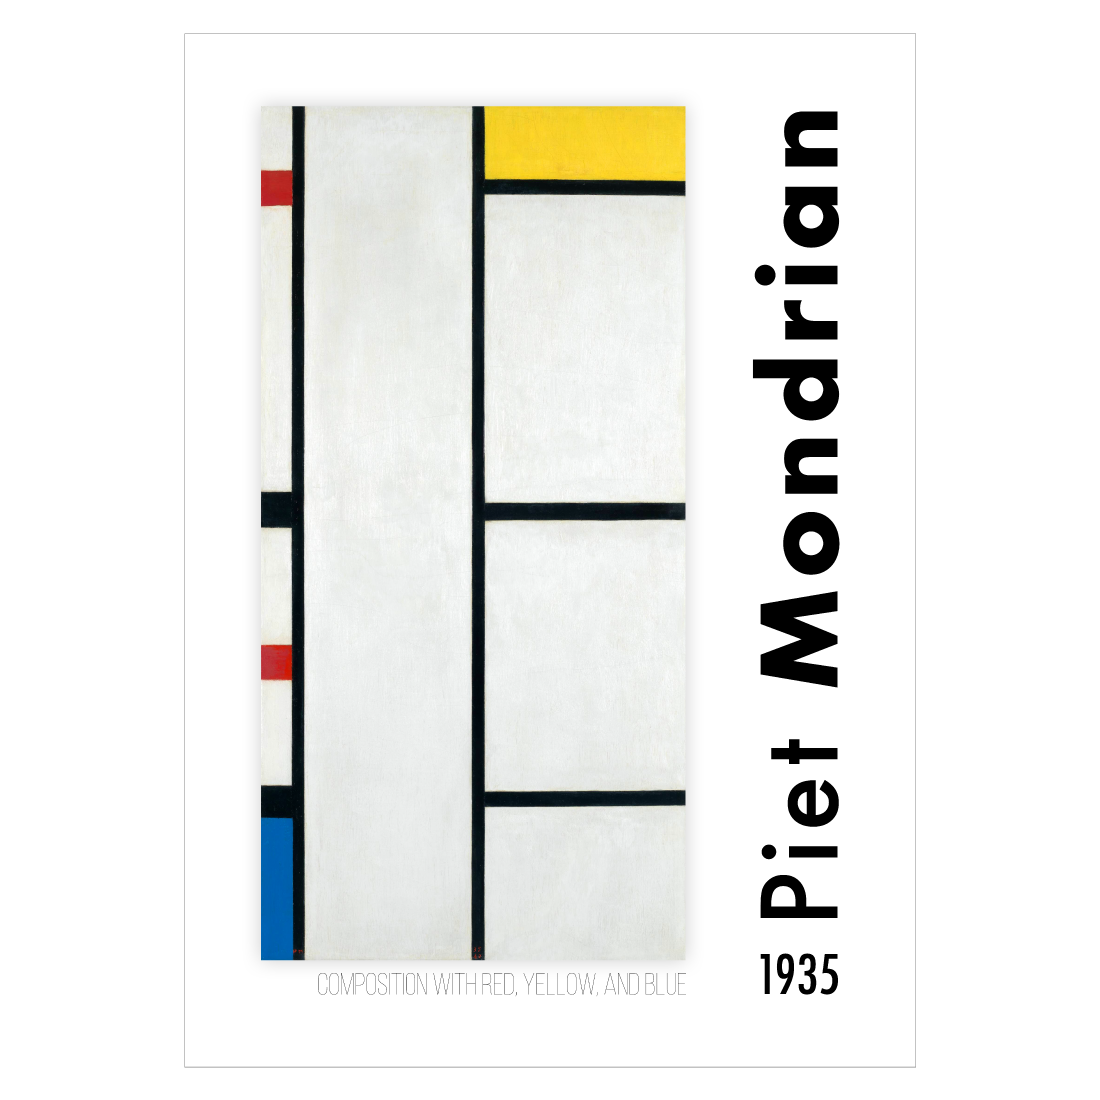 kunstplakat med Piet Mondrians "Composition with red yellow and blue"